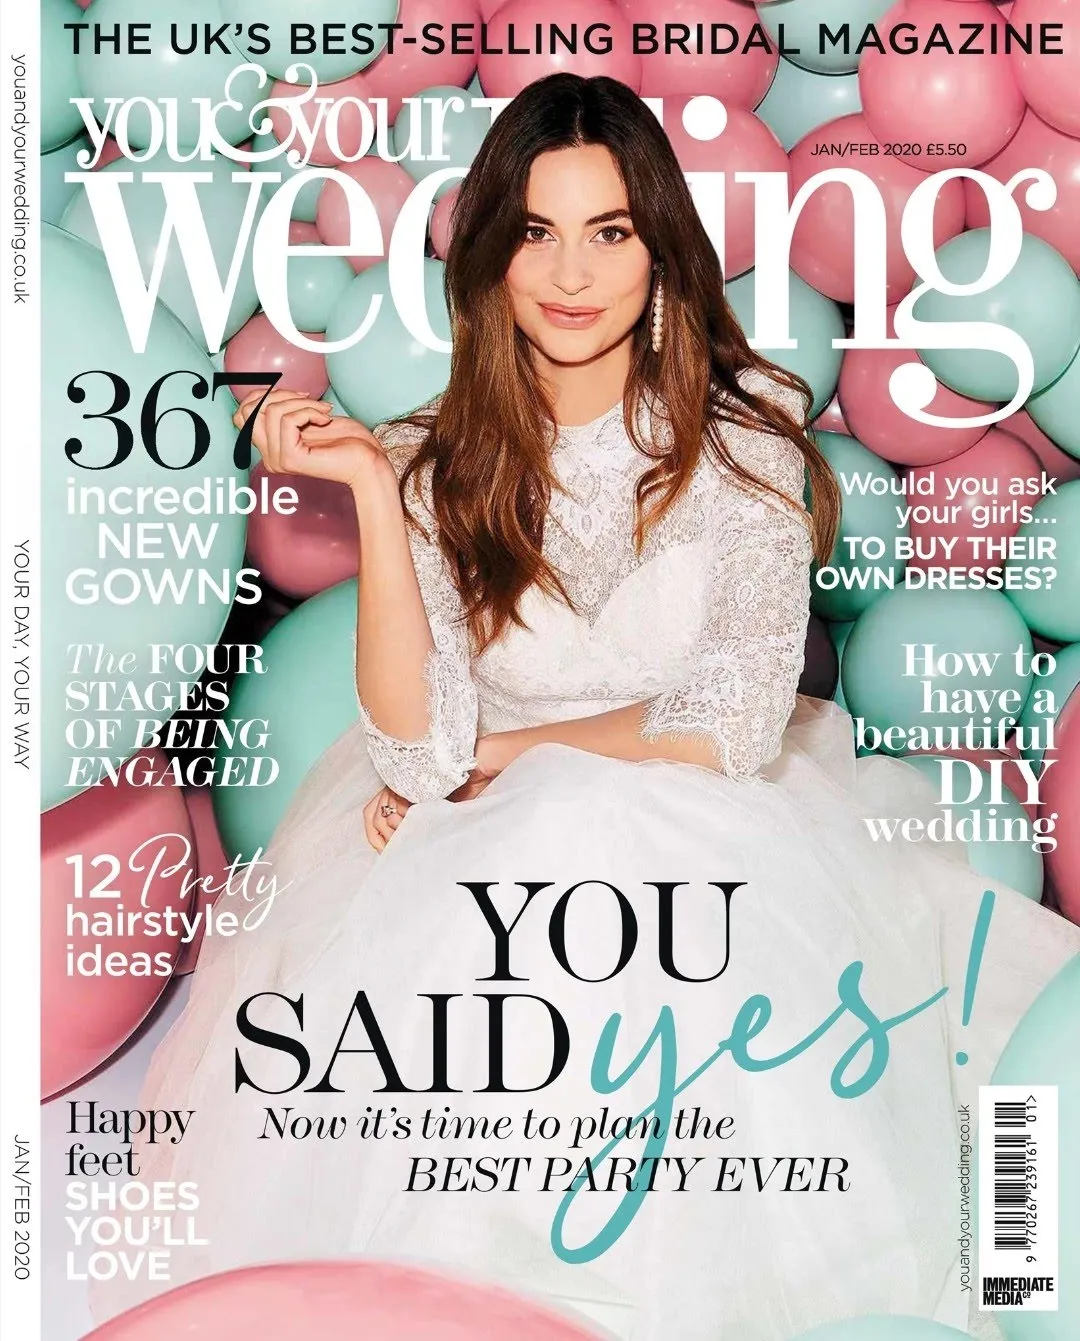 Image of a front cover of You and Your wedding magazine